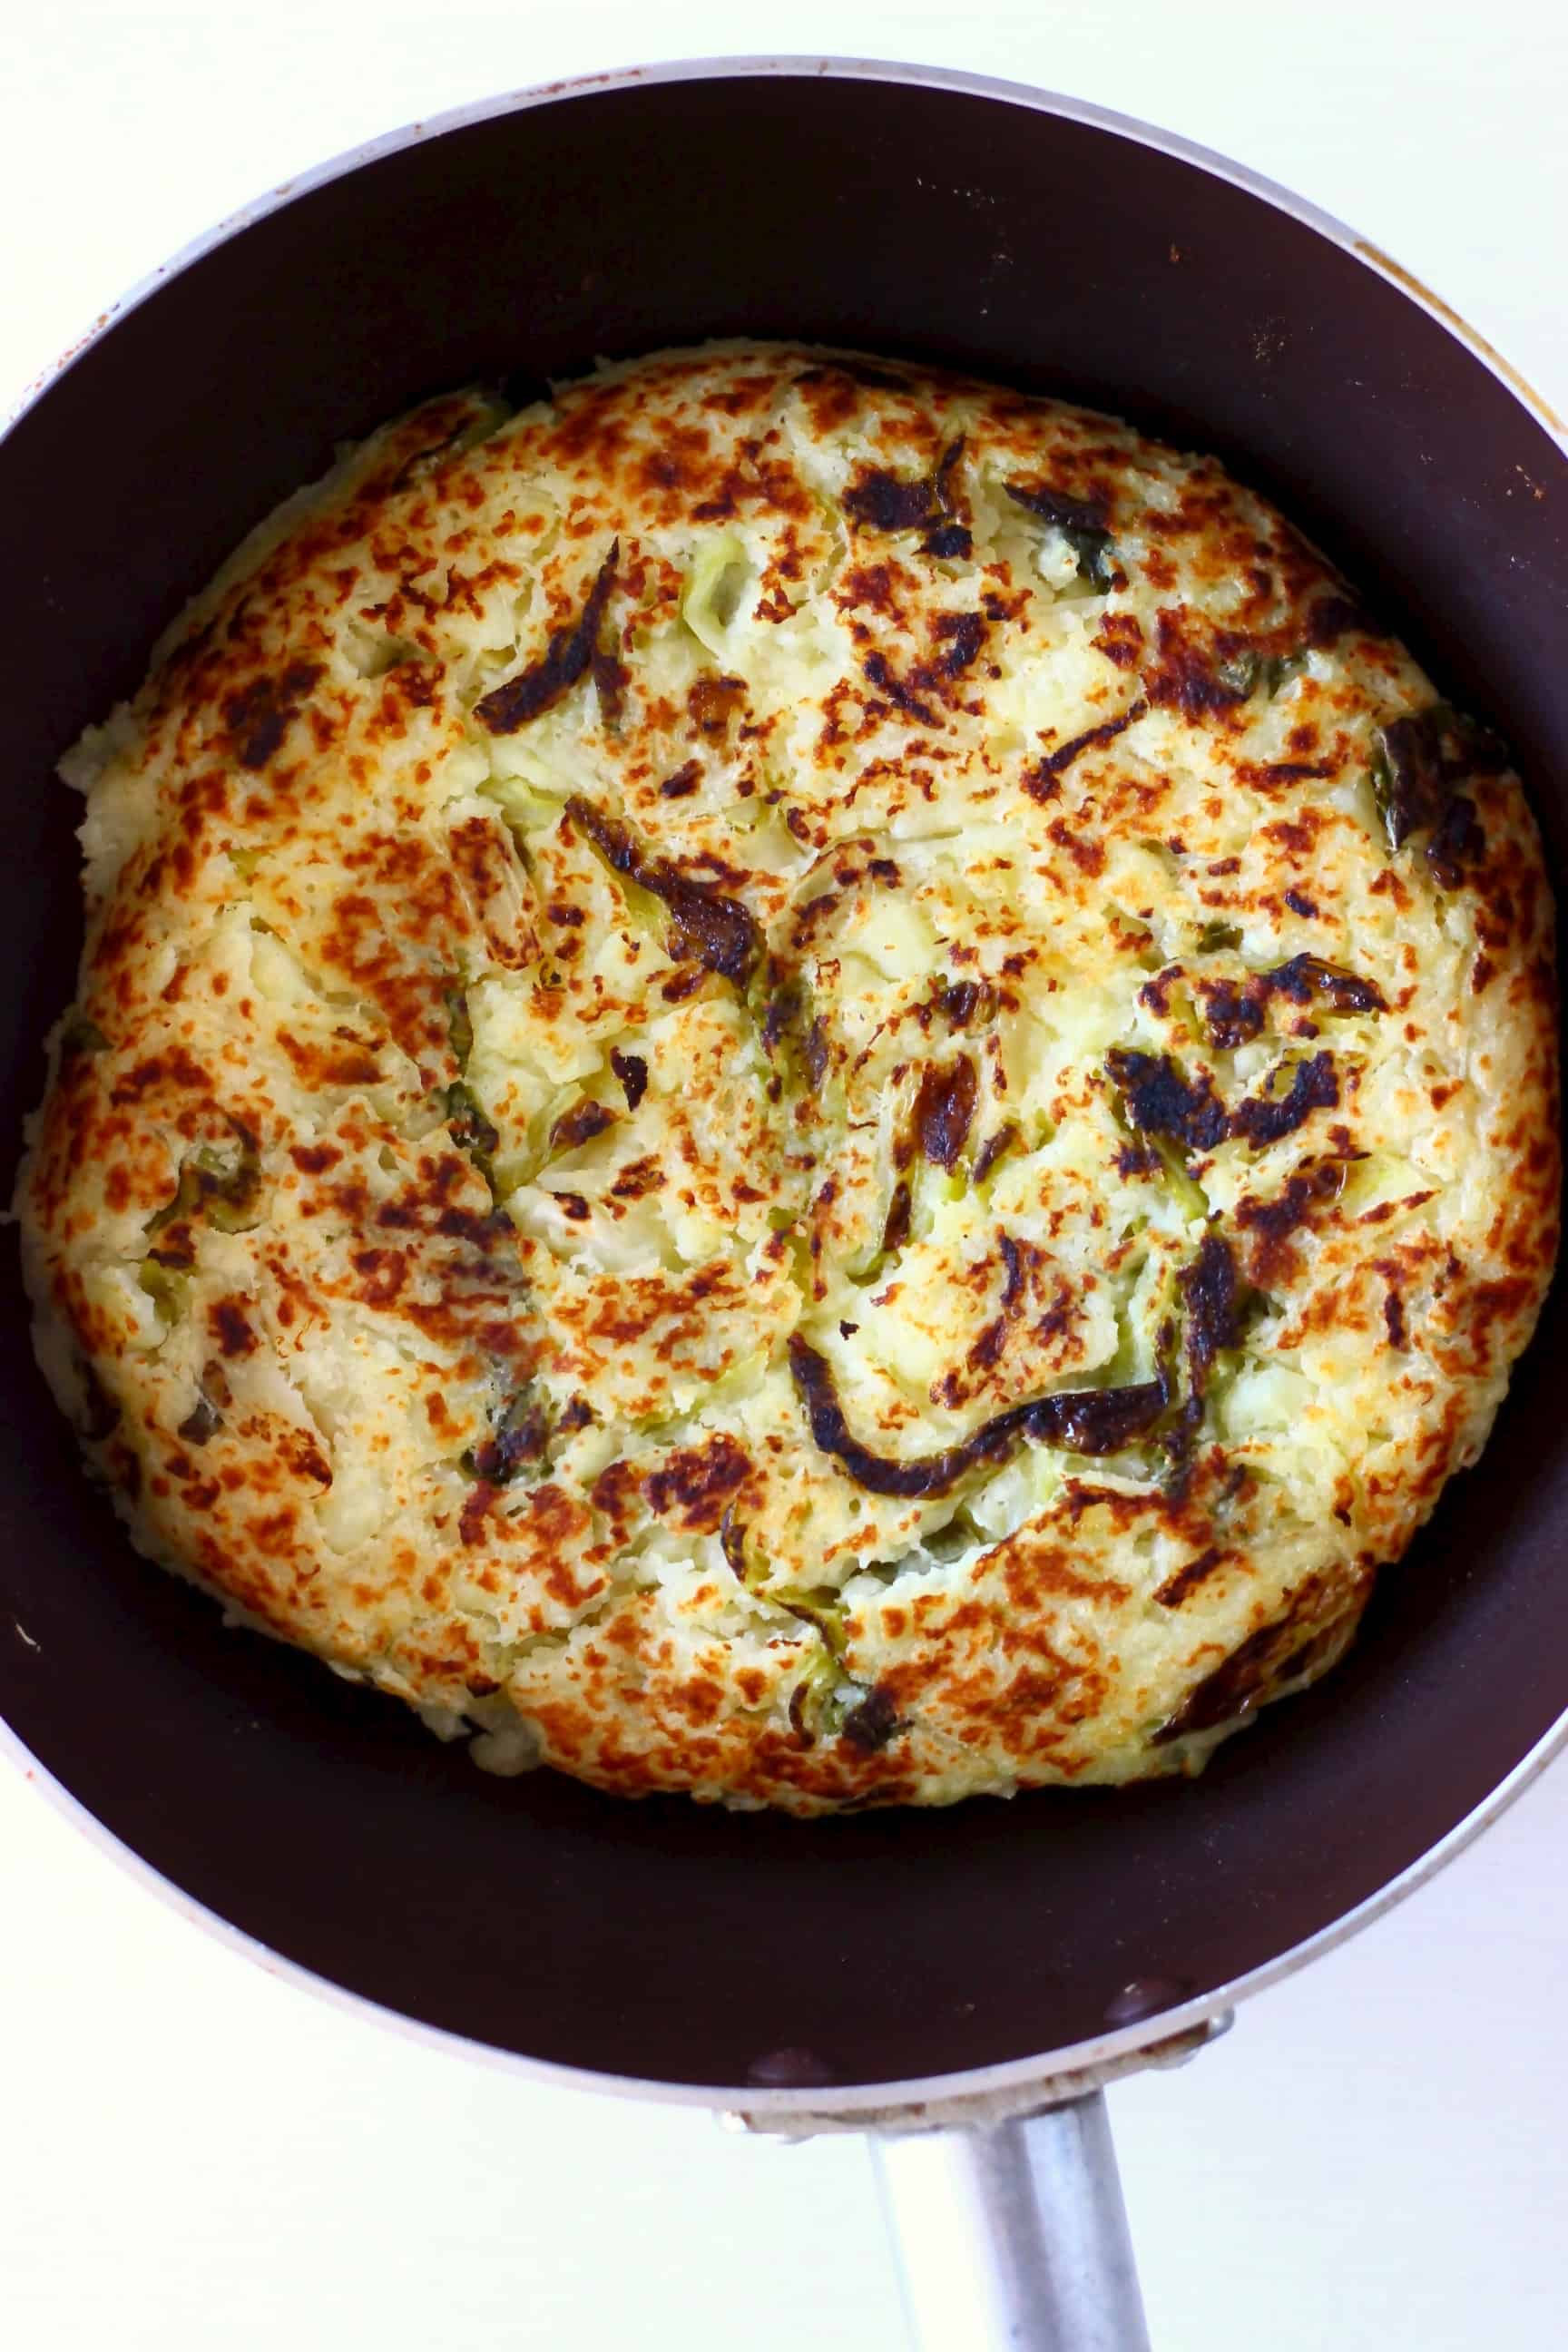 A circular, golden brown bubble and squeak cake in a frying pan